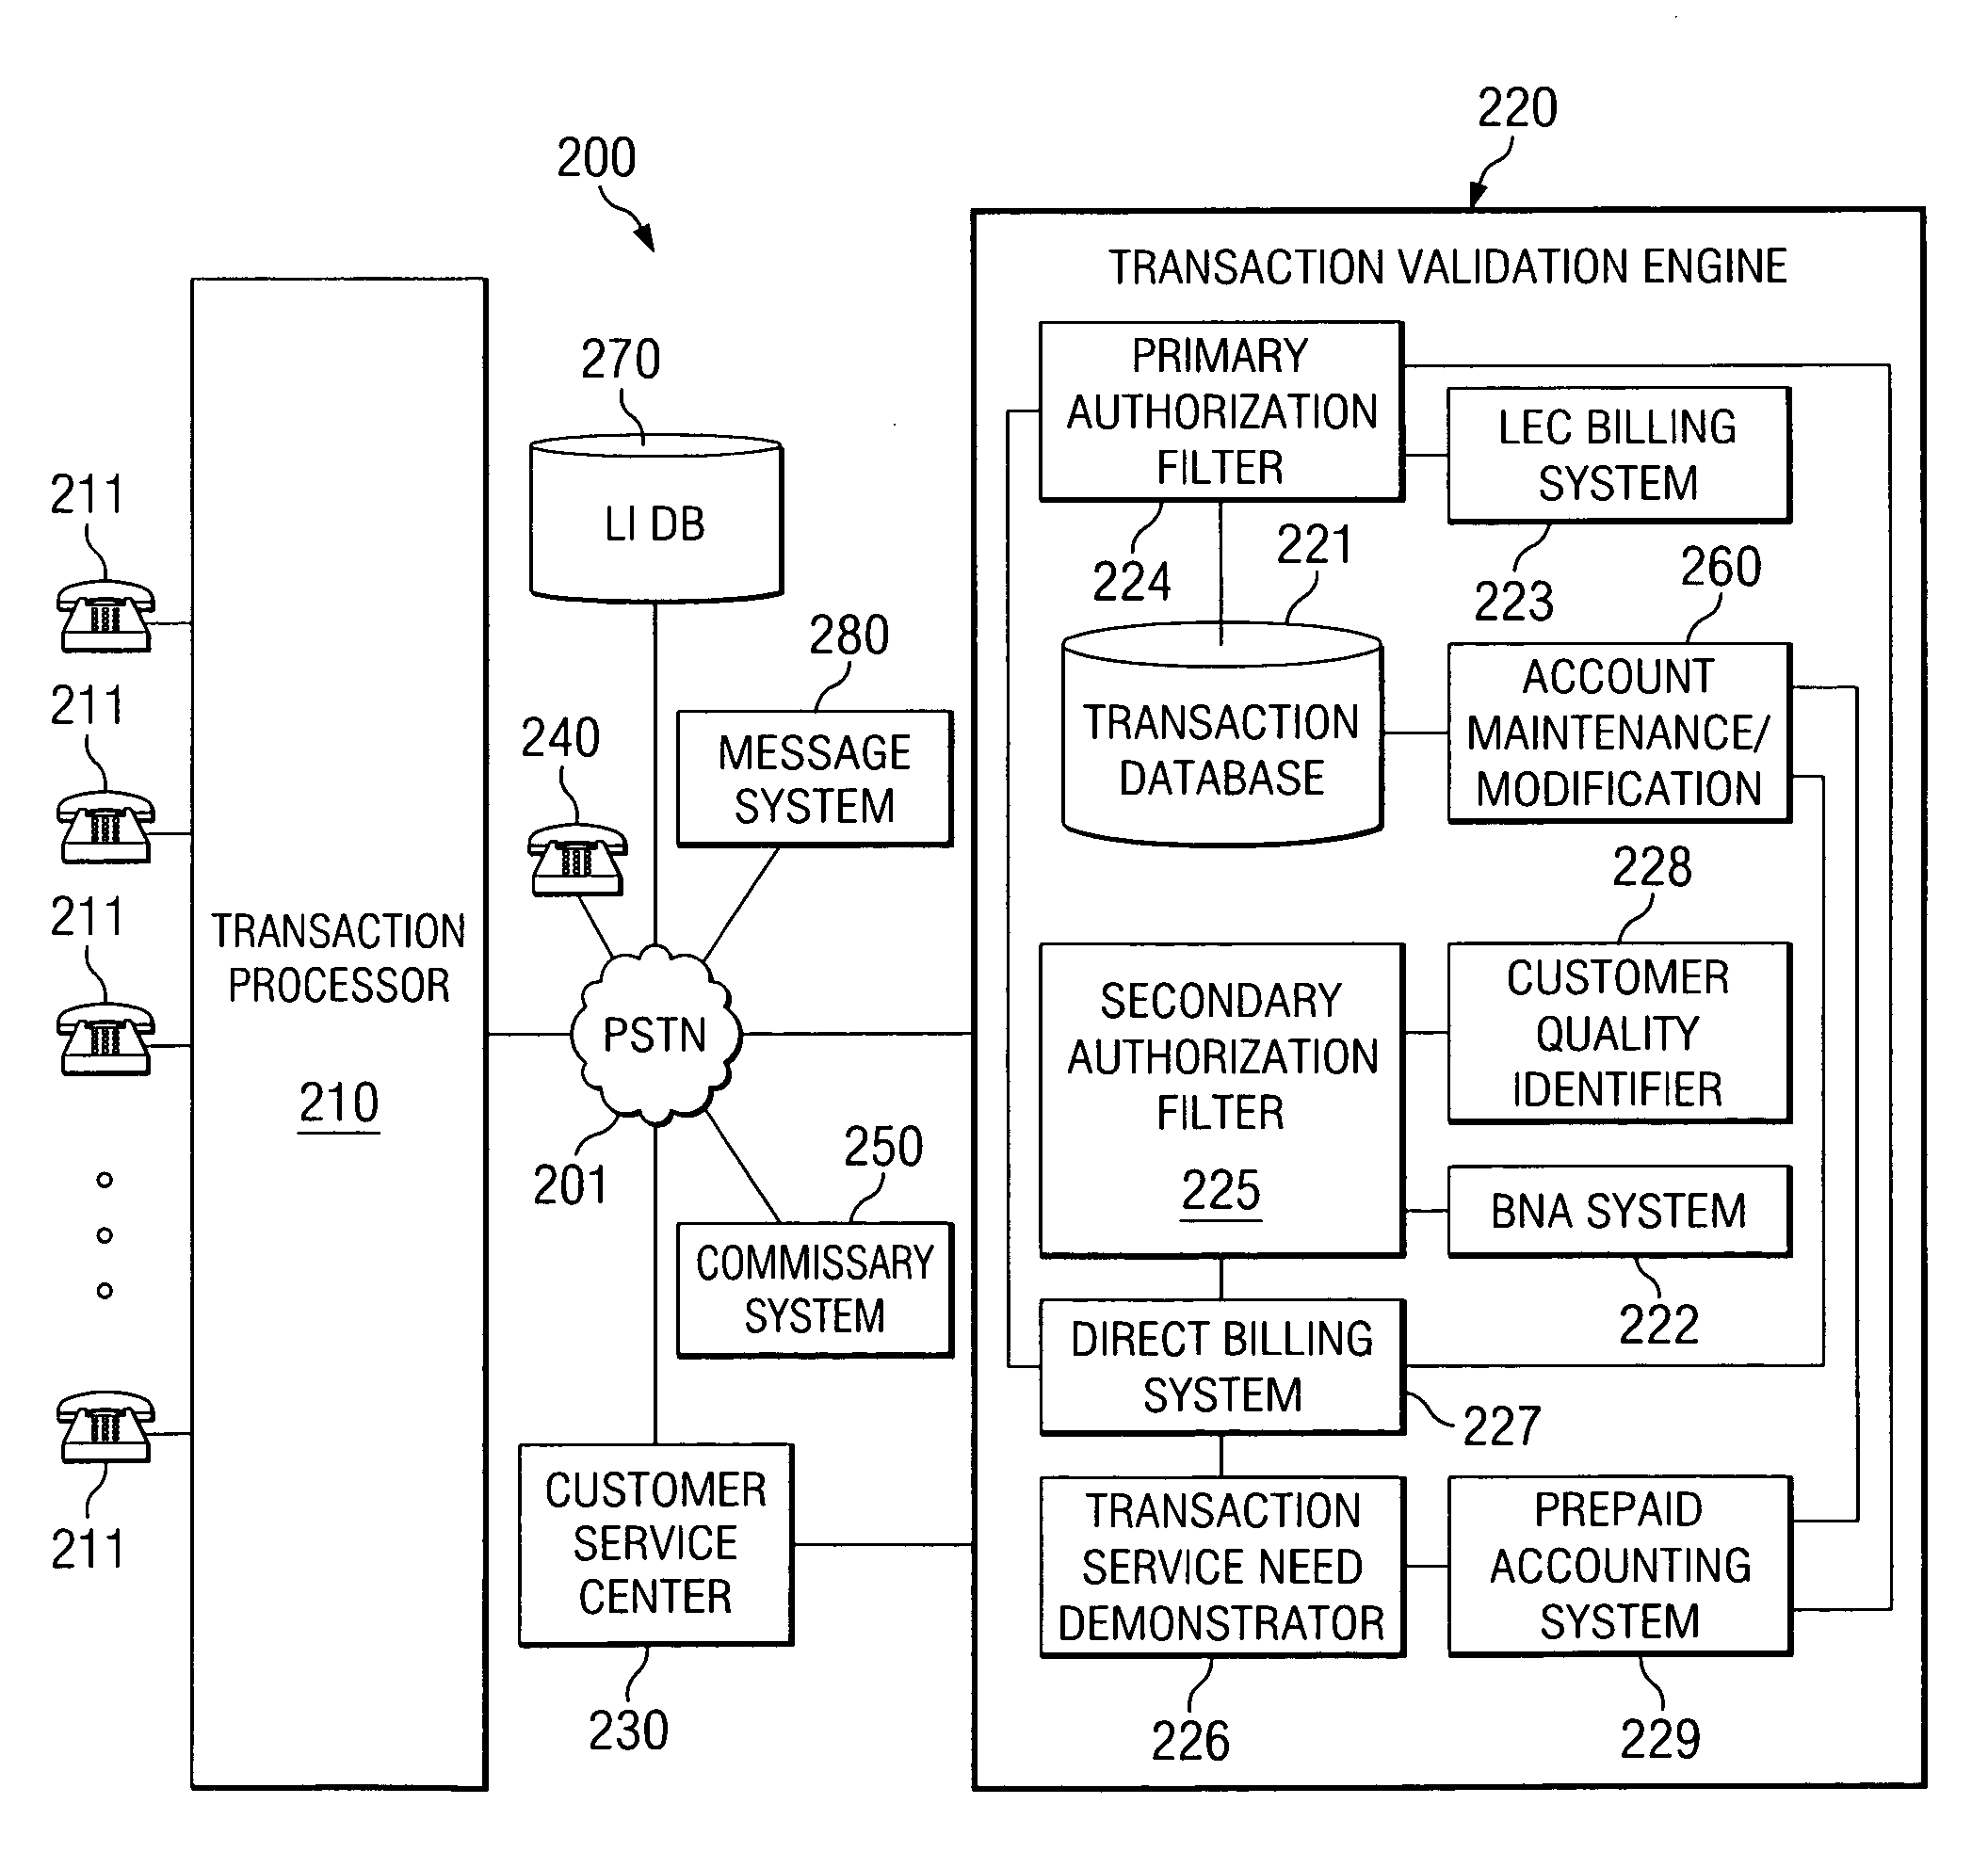 Systems and methods for account establishment and transaction management